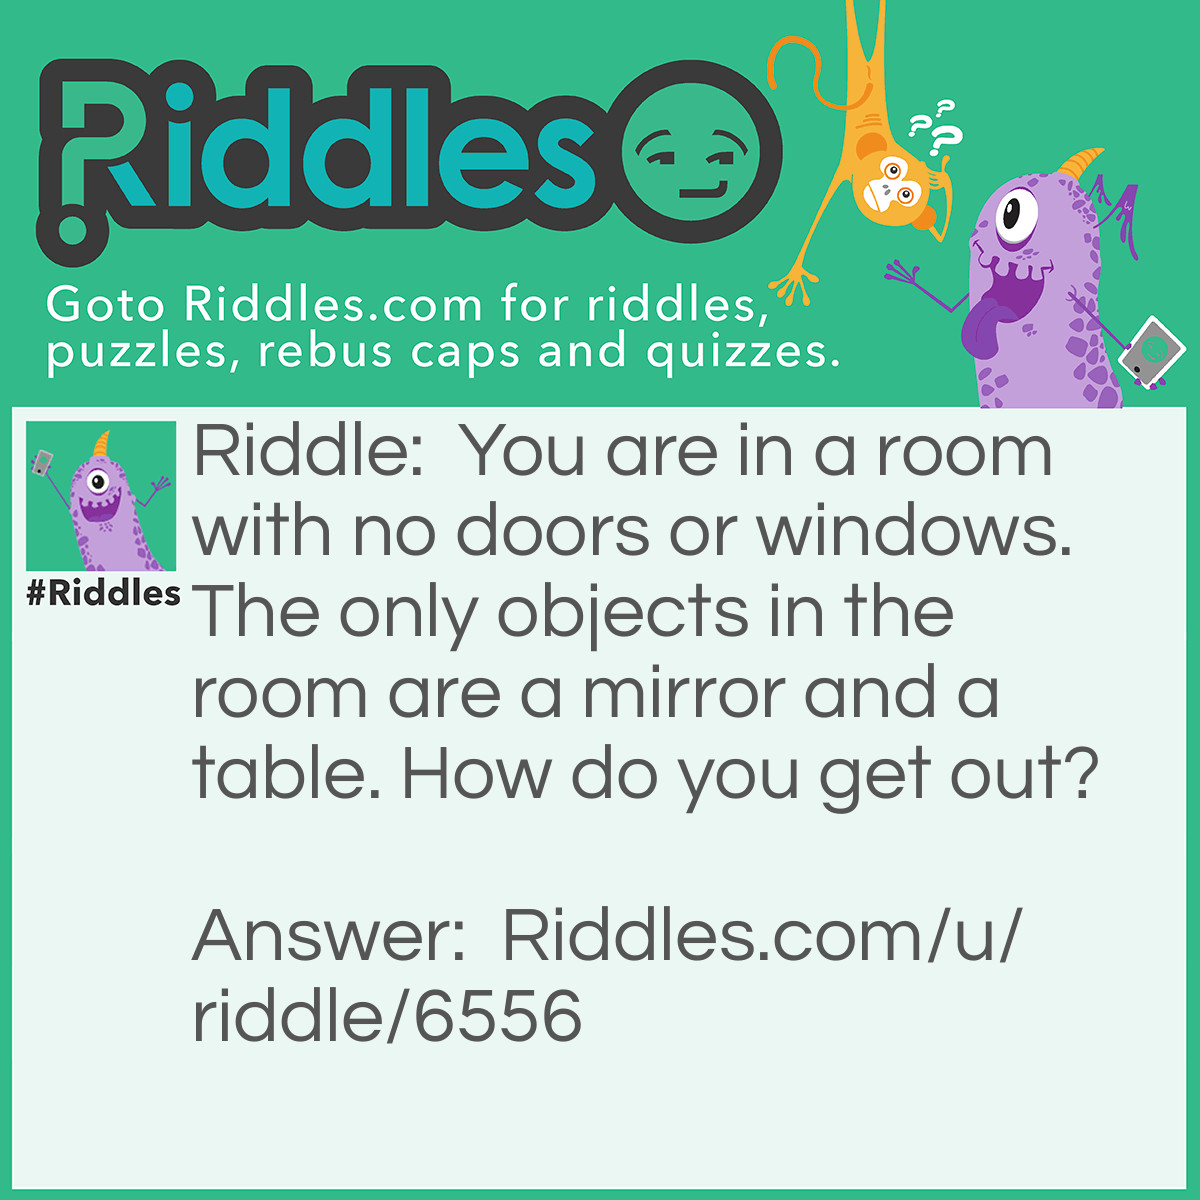 Riddle: You are in a room with no doors or windows. The only objects in the room are a mirror and a table. How do you get out? Answer: You look in the mirror, you see what you saw, you take the saw, you cut the table in half, two halves make a whole, you jump out the hole!